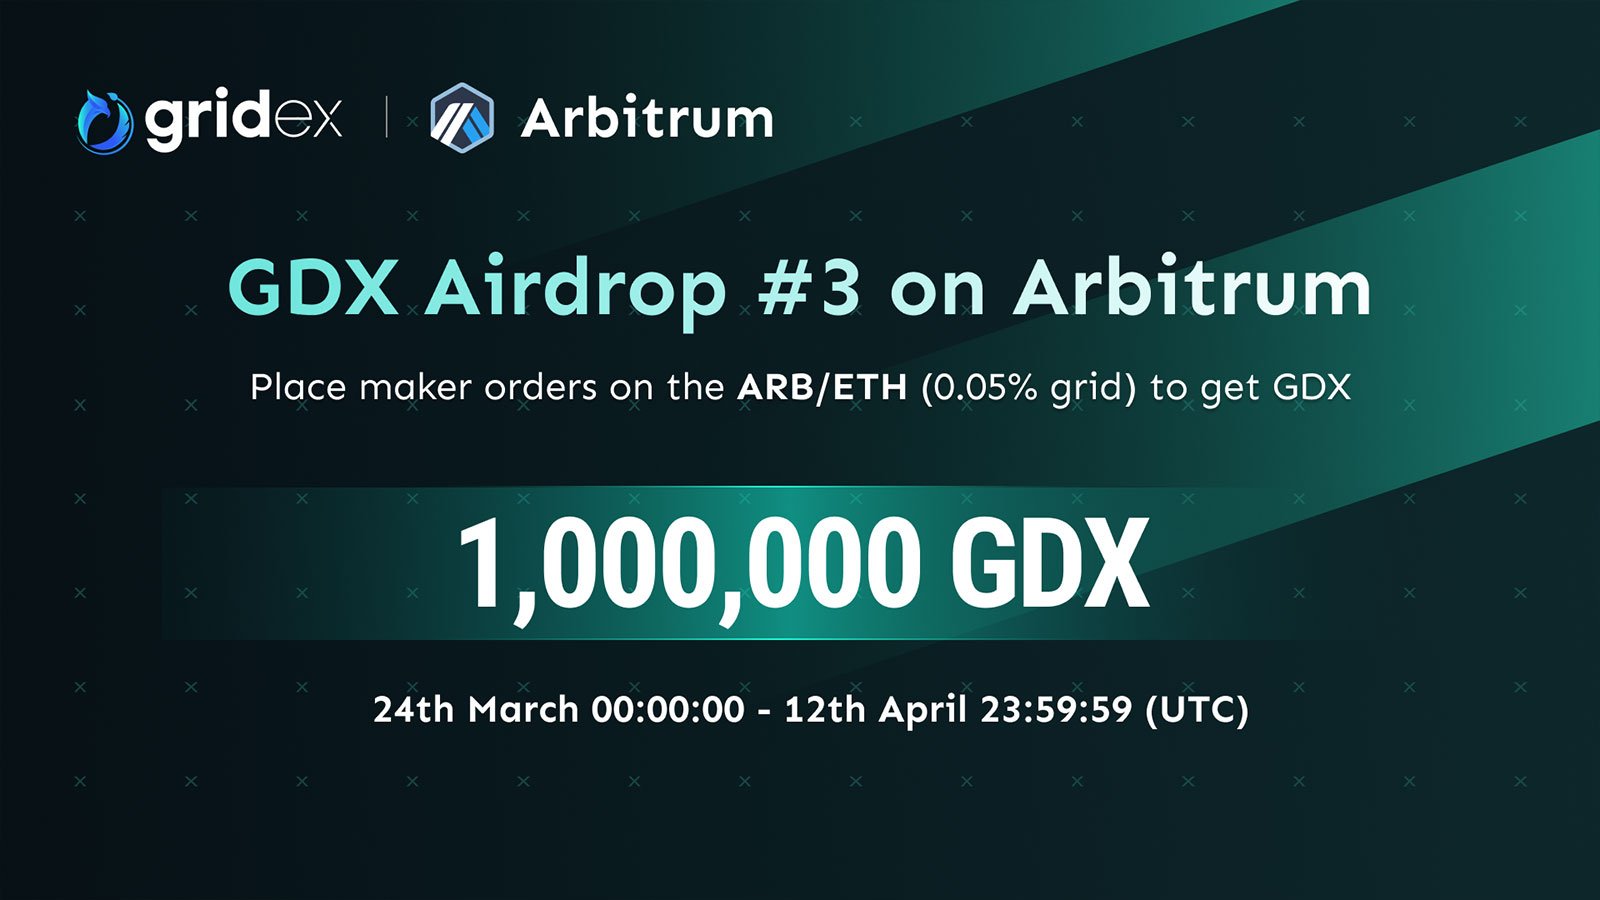 Gridex's Third Round of GDX Airdrop Offers Exciting Opportunity to Earn GDX by Trading ARB on Arbitrum